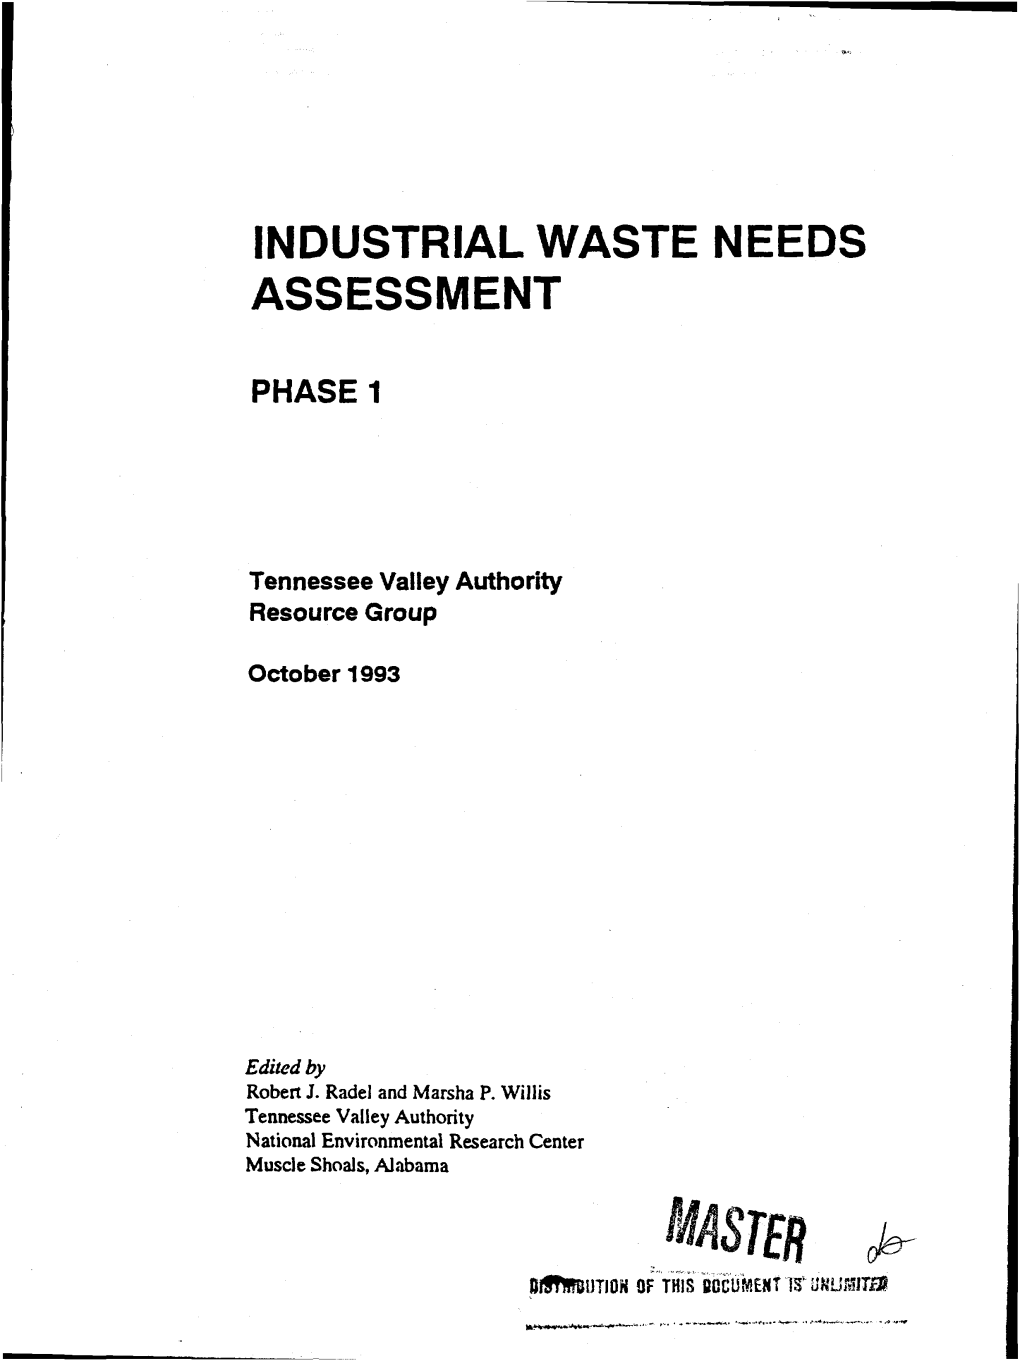 Industrial Waste Needs Assessment